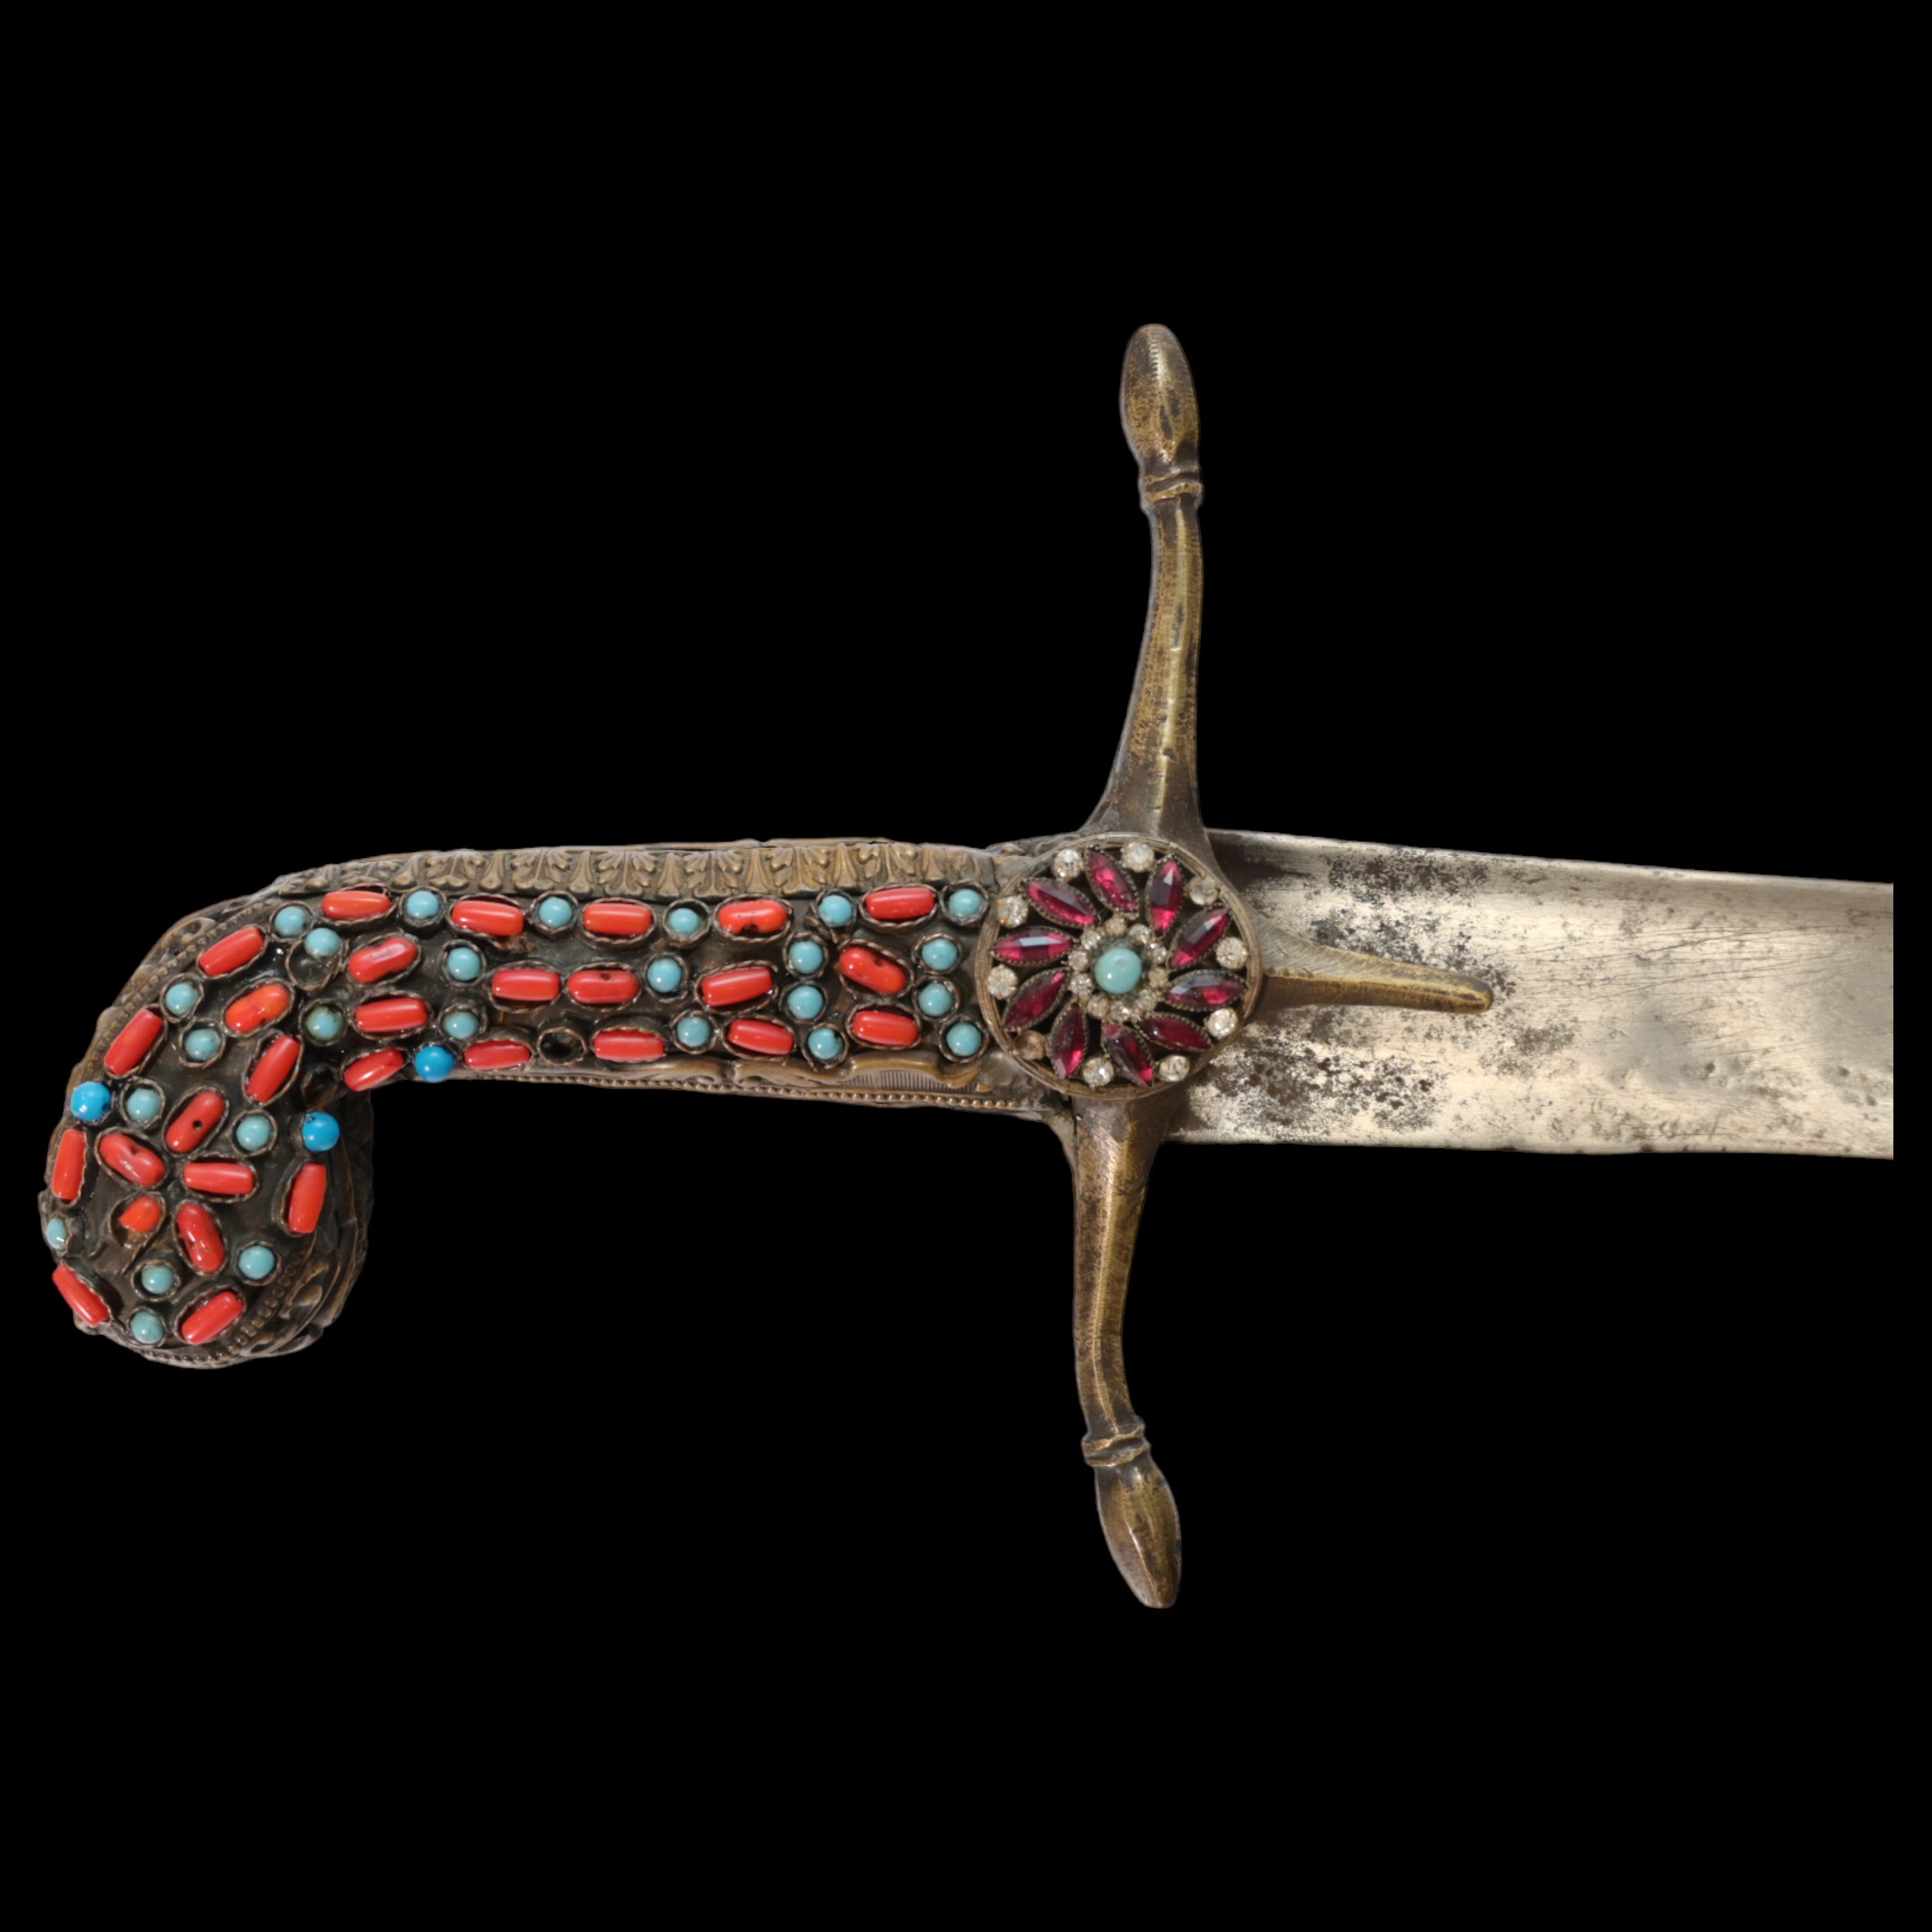 Rare Ottoman sword, Kilij, Pala, decorated with corals and turquoise, Turkey, Trabzon, around 1800. - Image 4 of 31